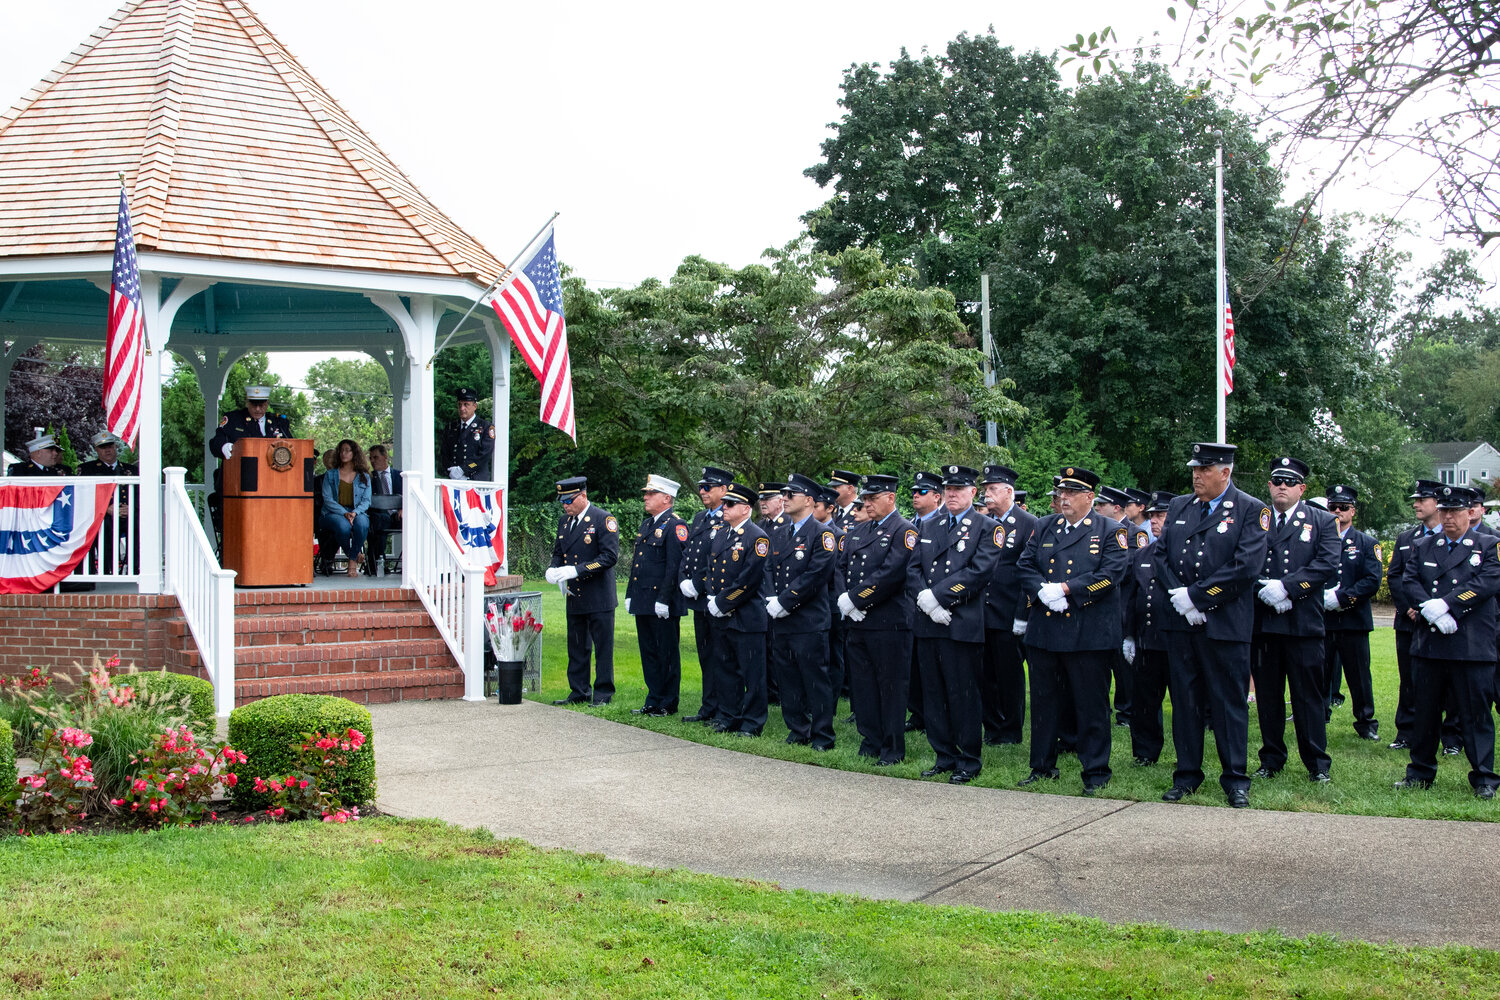 Joseph Gerrato, chief of the Franklin Square and Munson Fire Department, addressed the attendees at the memorial service.